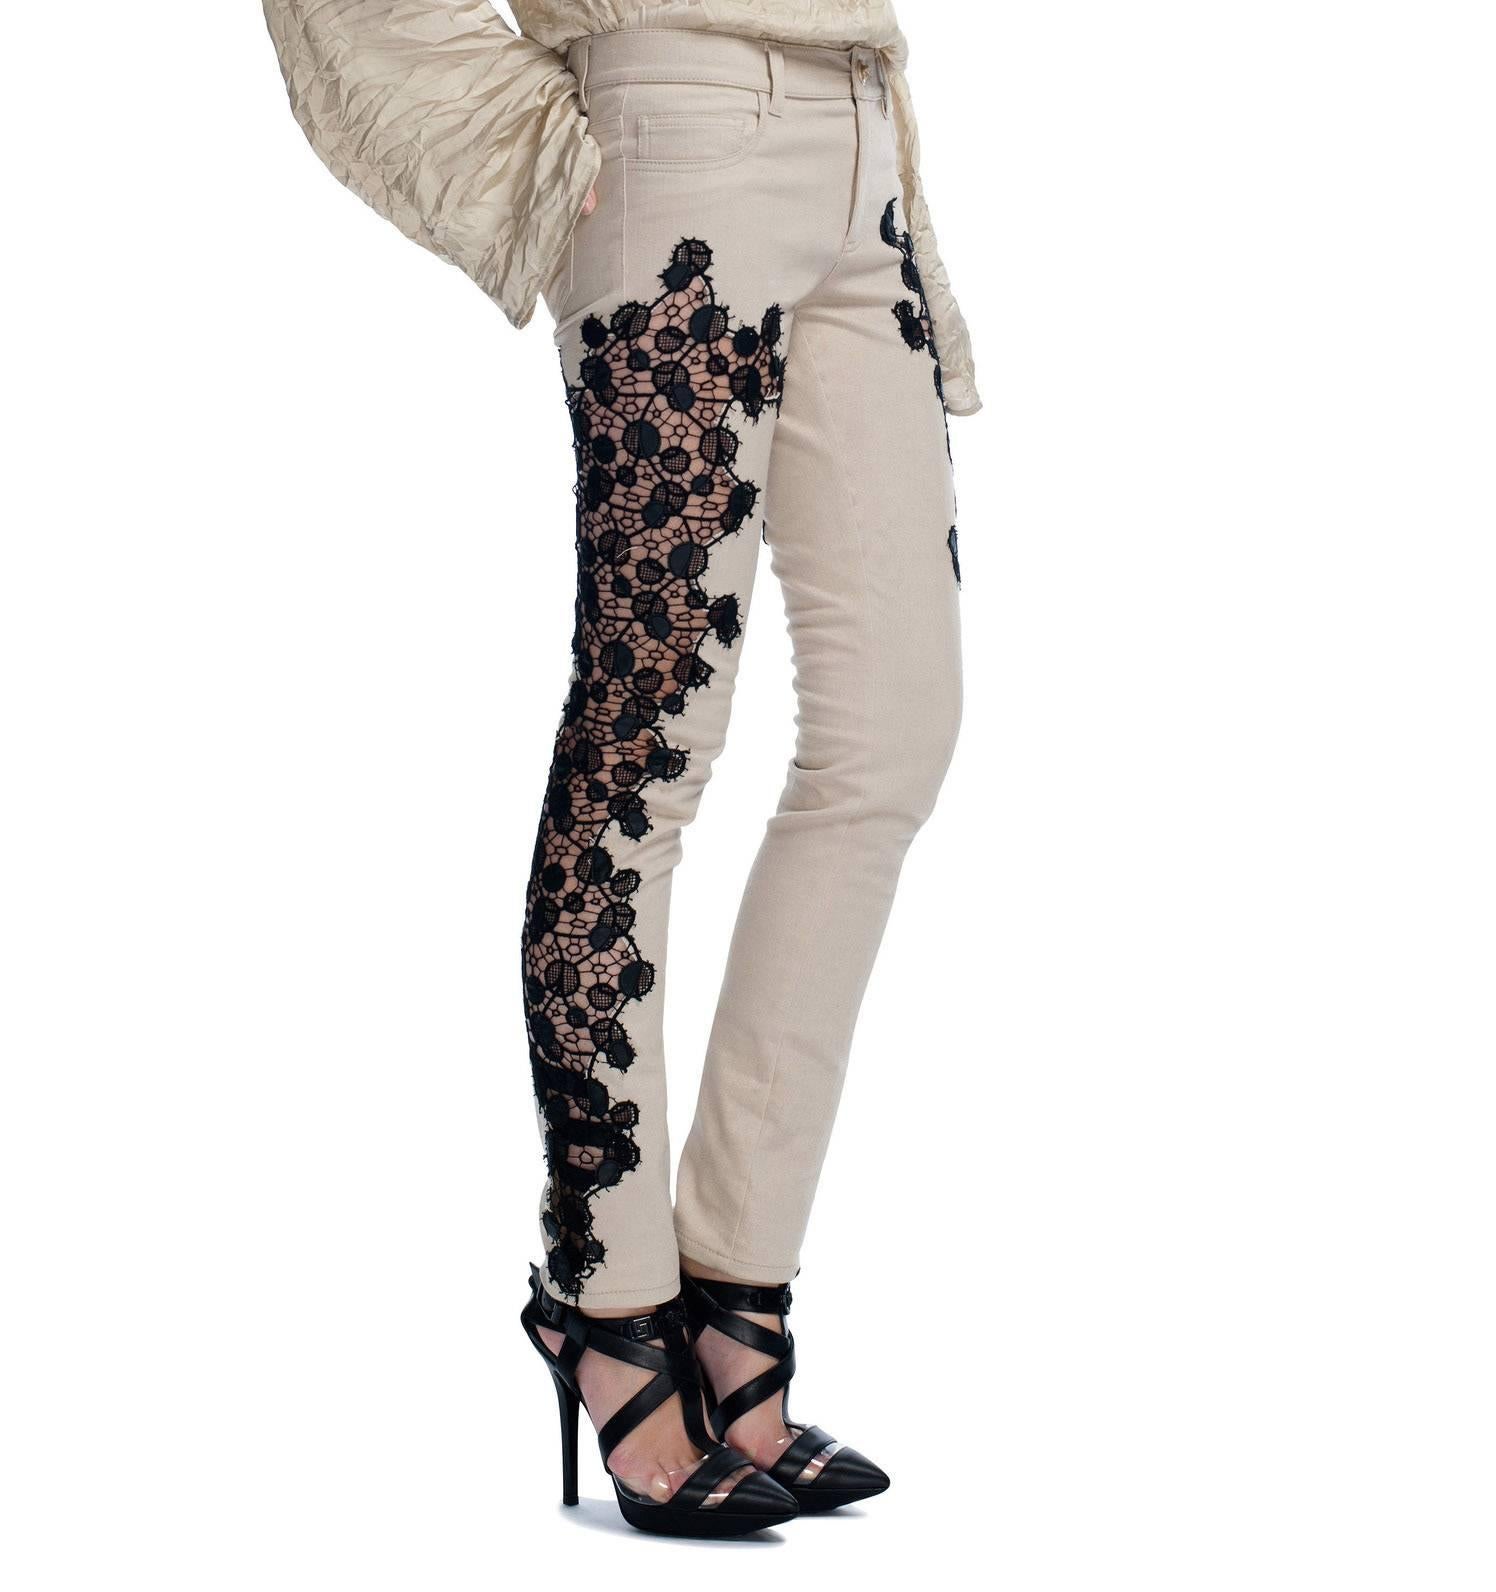 S/S 2013 Look # 19 VERSACE BEIGE JEANS w/BLACK LACE PANNEL size 26 In New Condition For Sale In Montgomery, TX